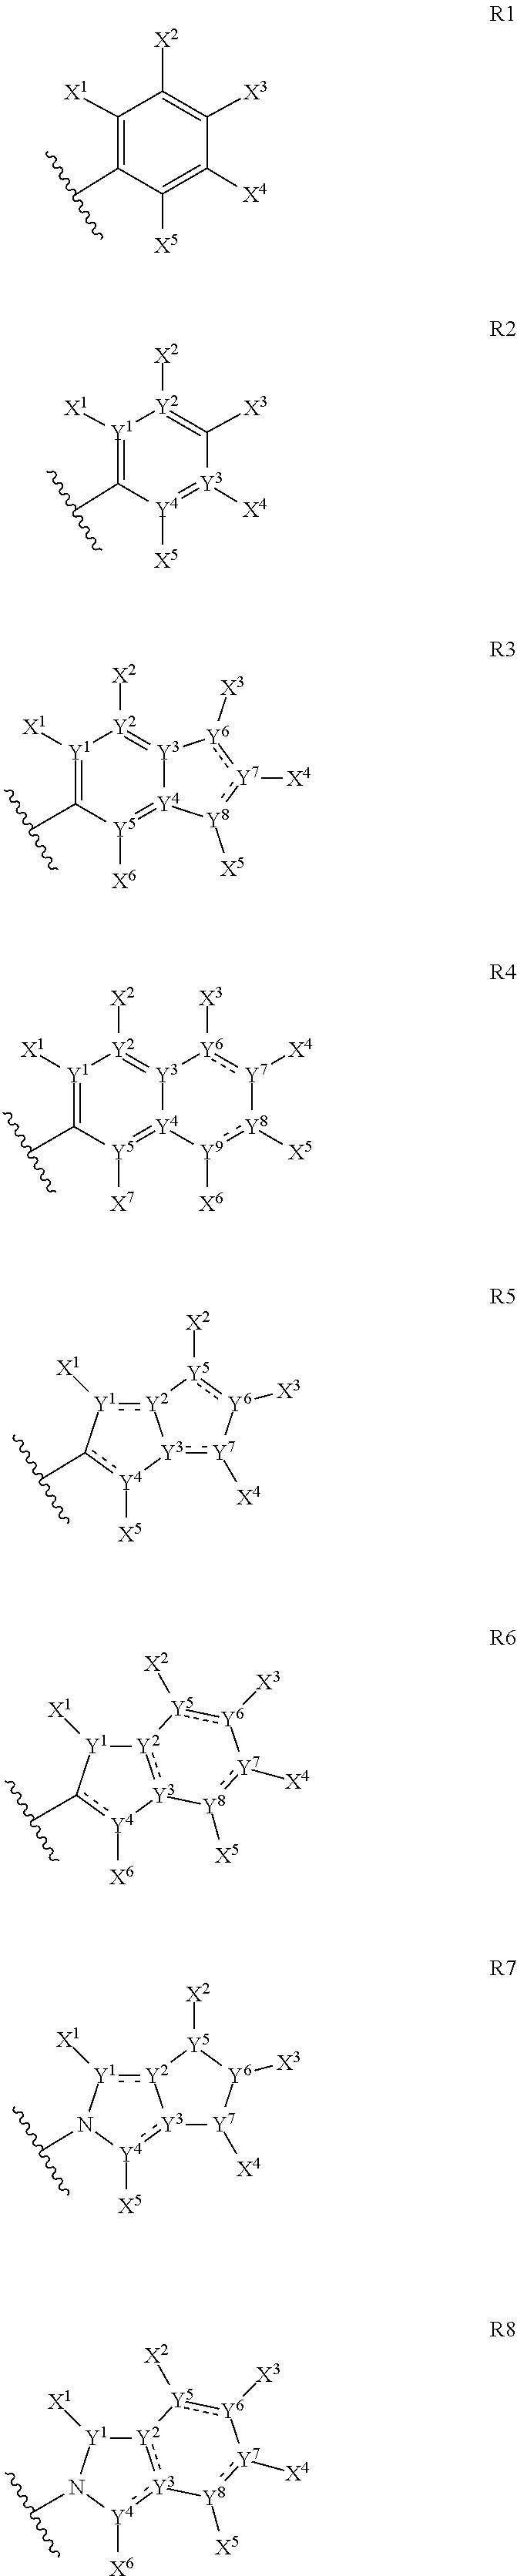 Anthelmintic depsipeptide compounds